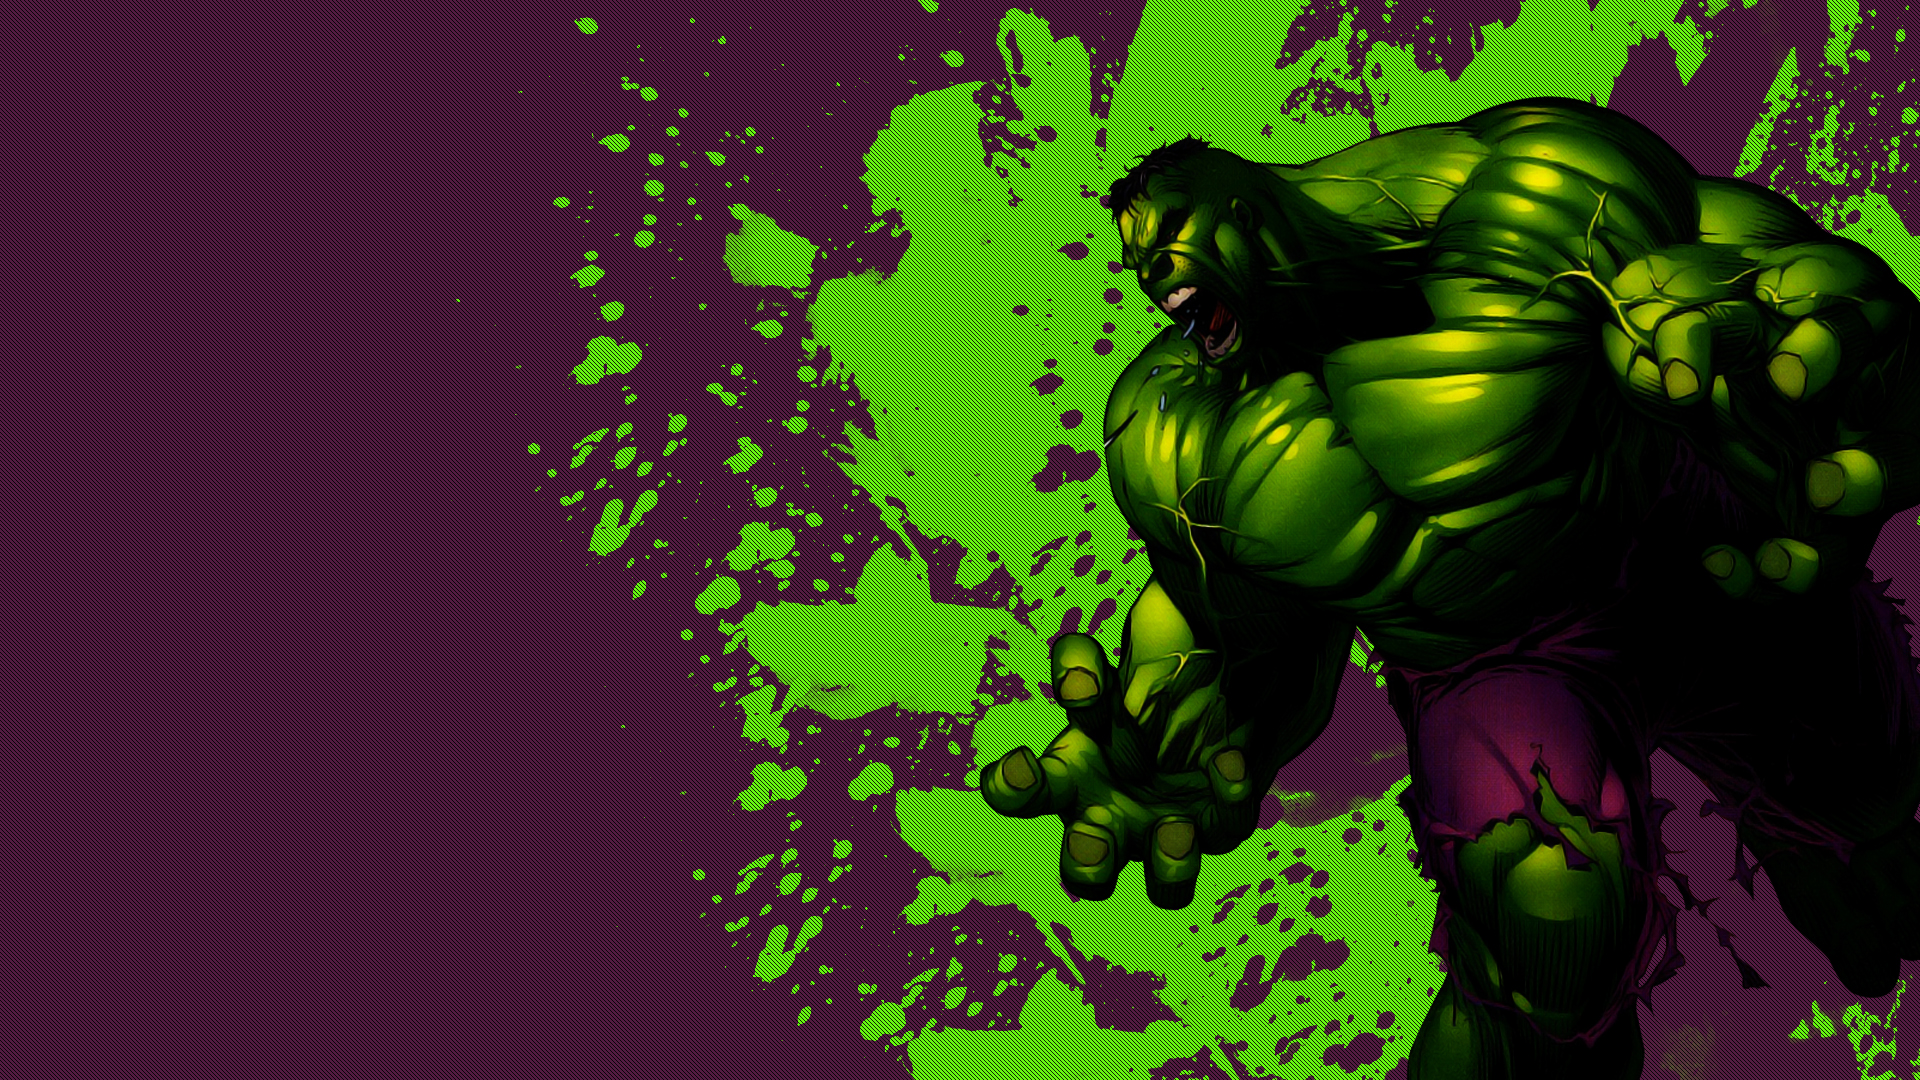 Hulk Wallpapers HD | Wallpapers, Backgrounds, Images, Art Photos.